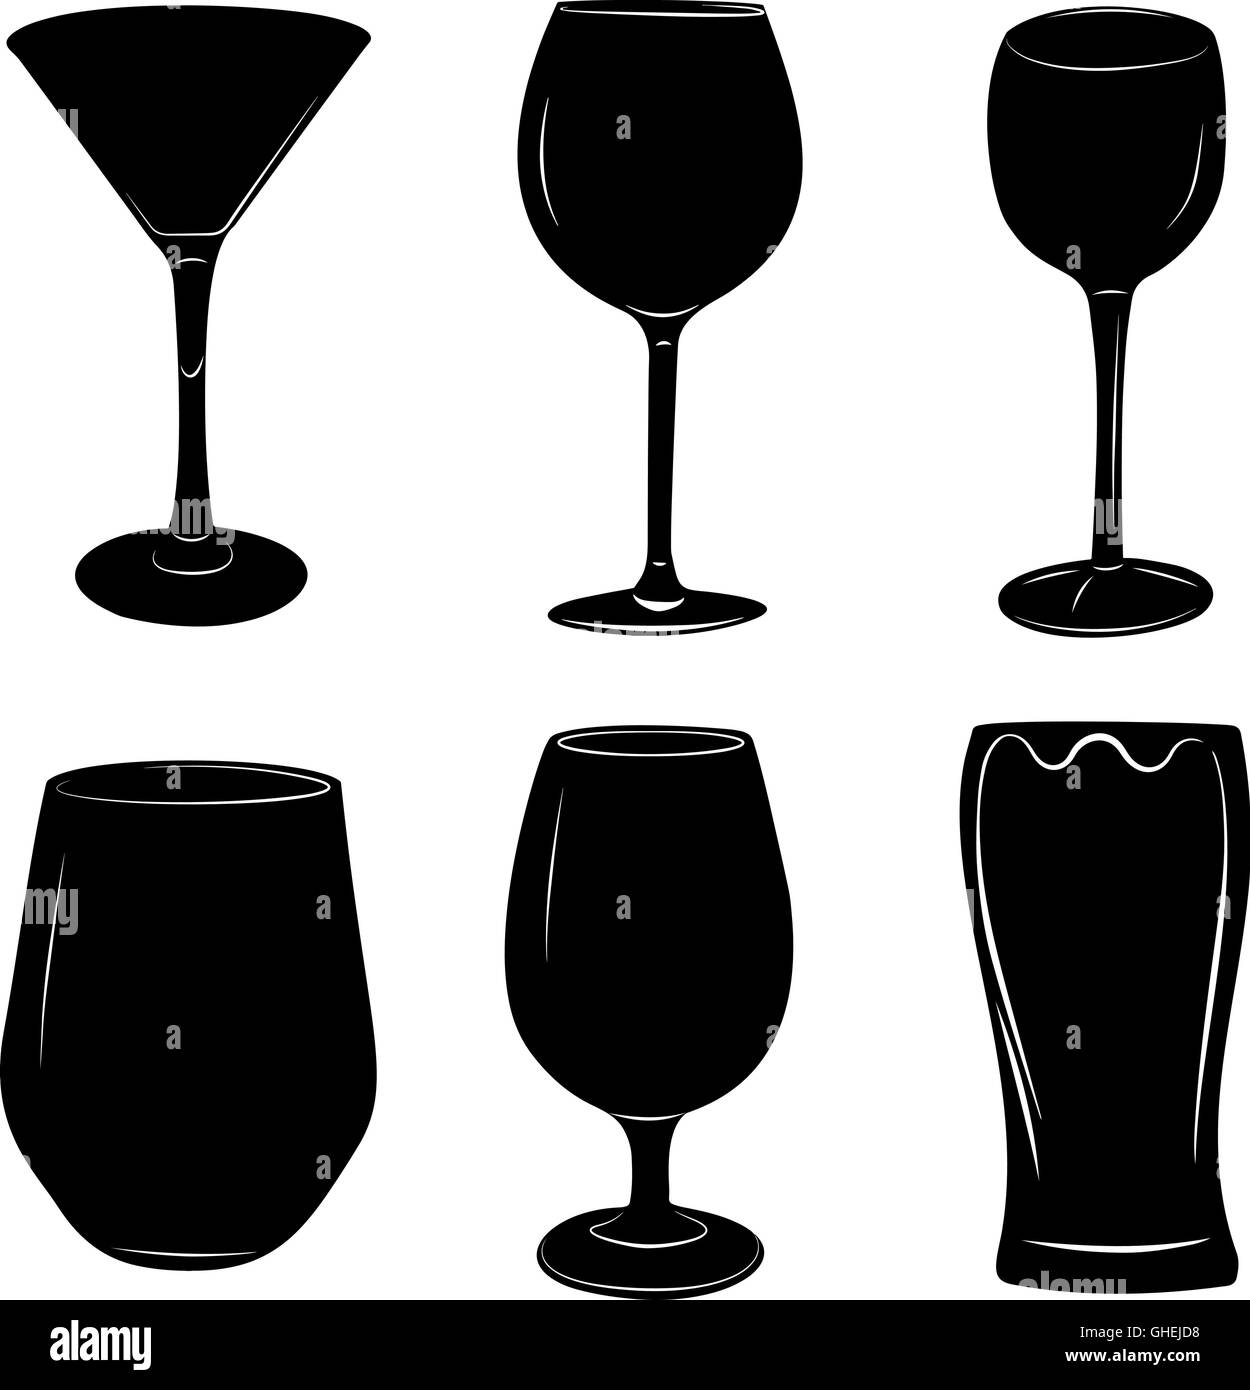 Set of wine and beer alcoholic beverages glasses vector illustration. Stock Vector